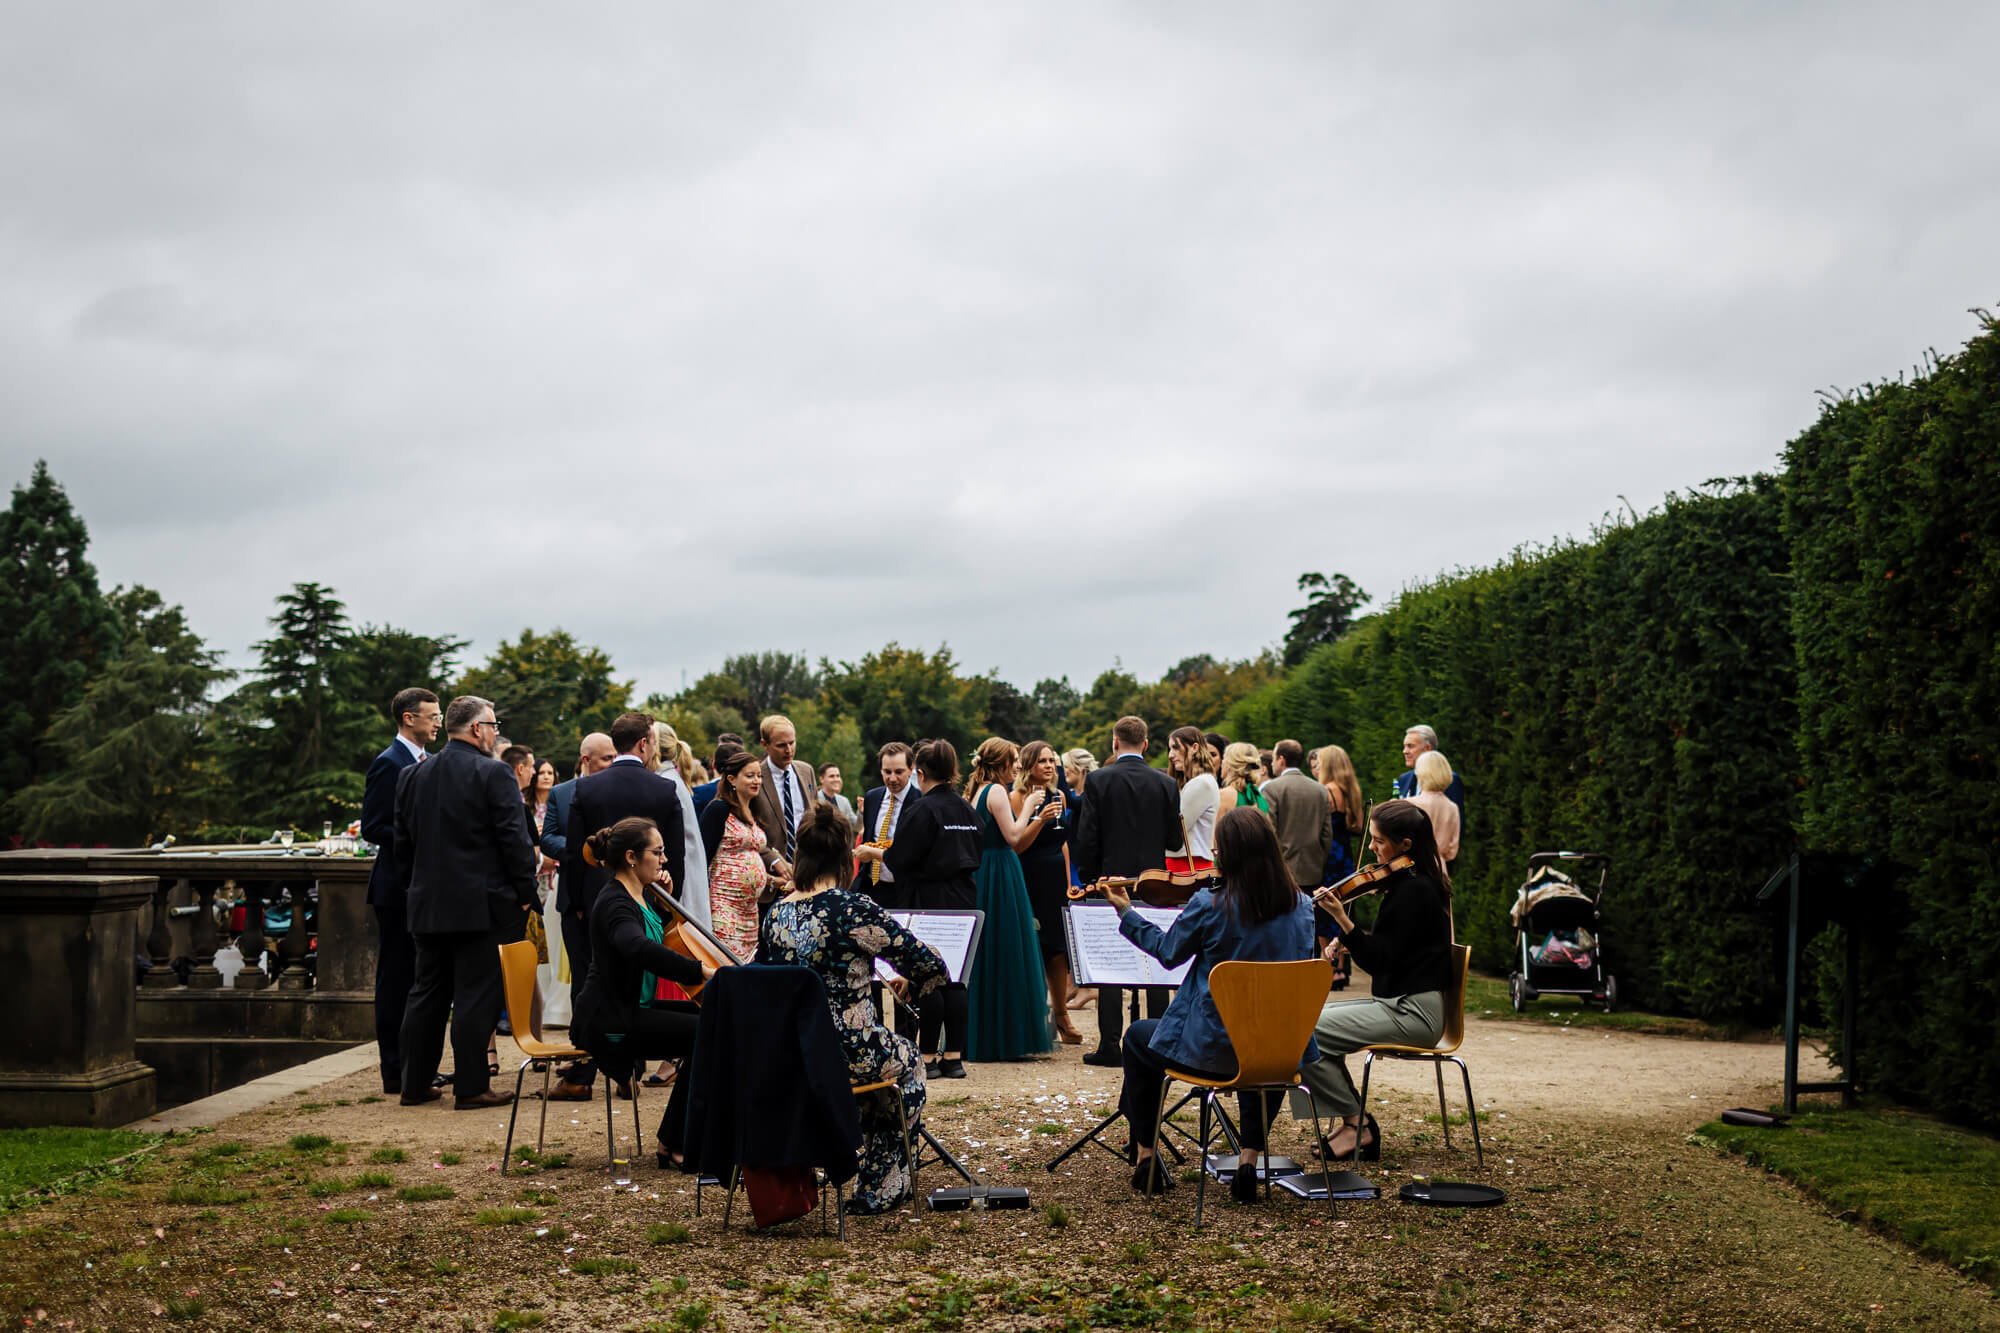 String quartet plays at a wedding in Yorkshire